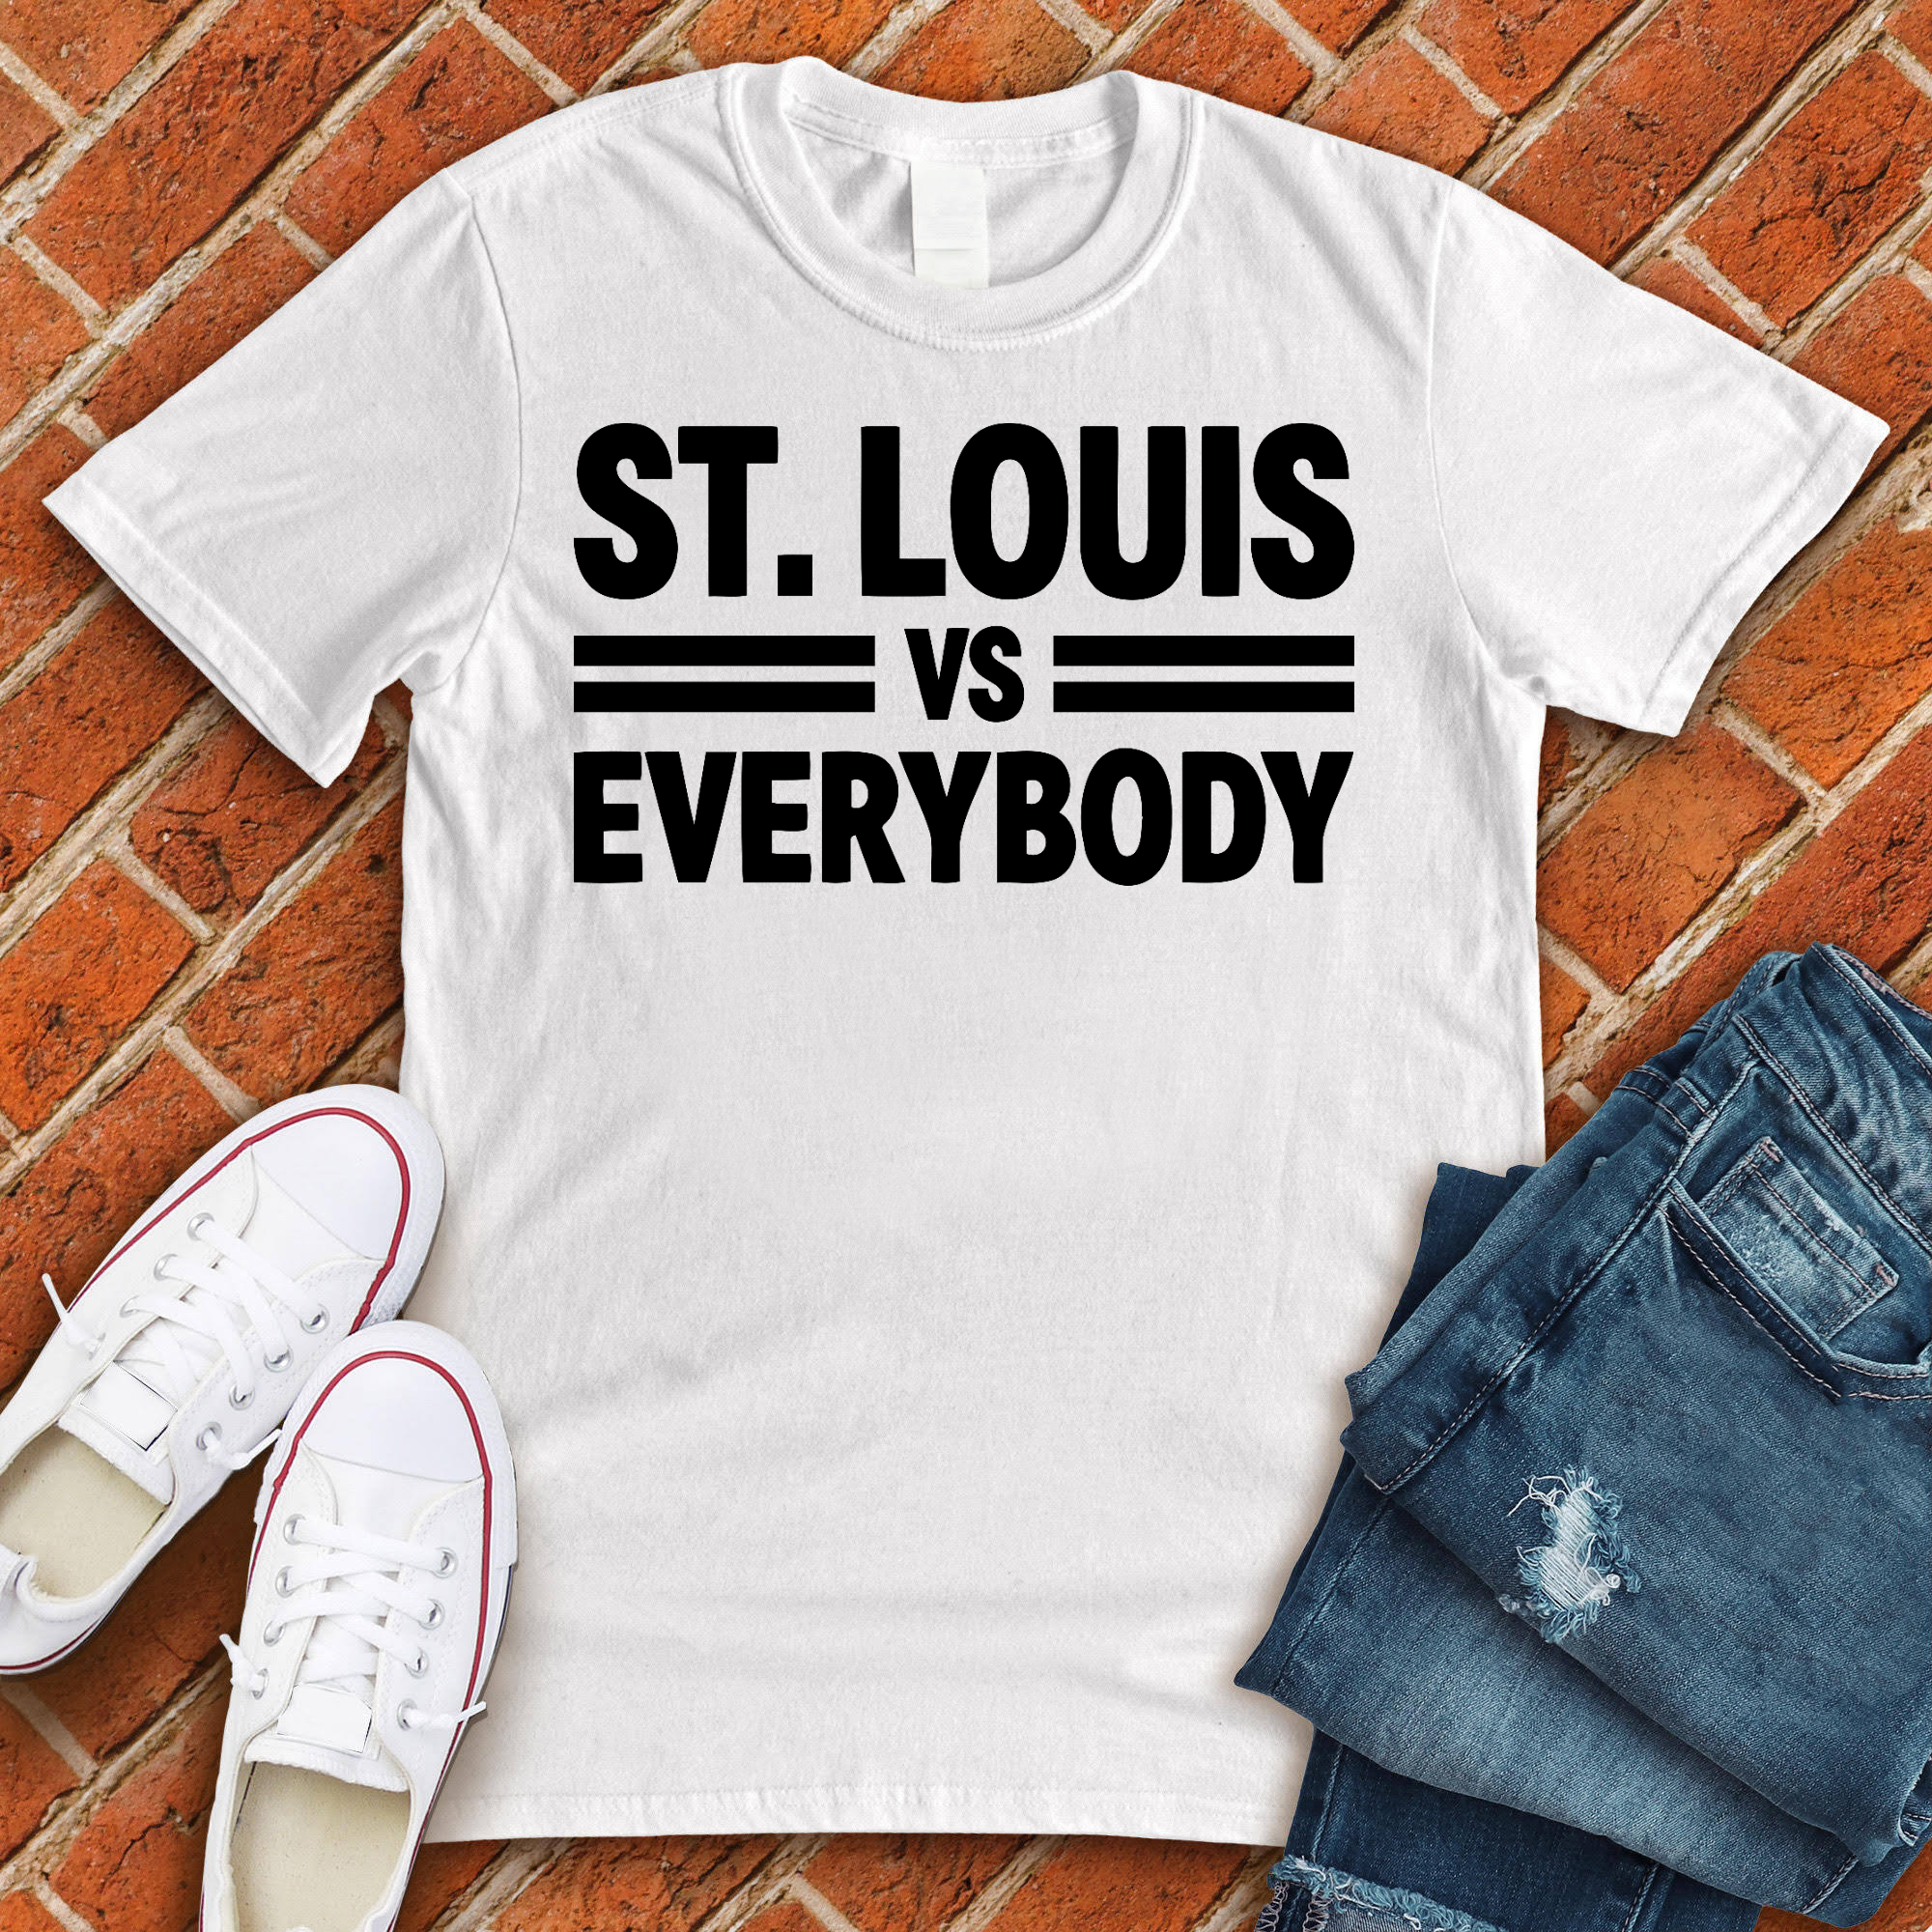 St. Louis vs Everybody | Essential T-Shirt